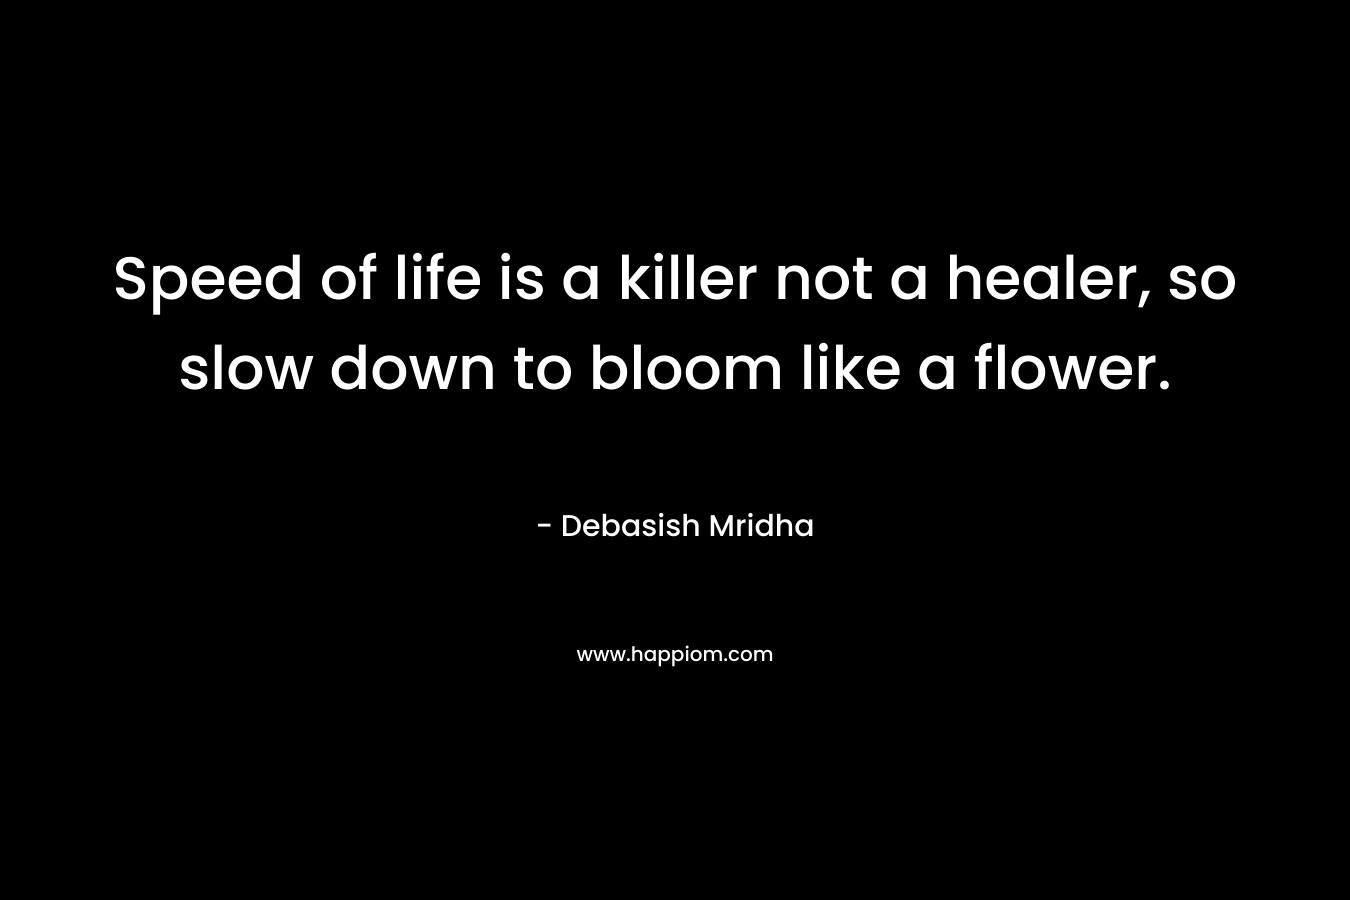 Speed of life is a killer not a healer, so slow down to bloom like a flower. – Debasish Mridha